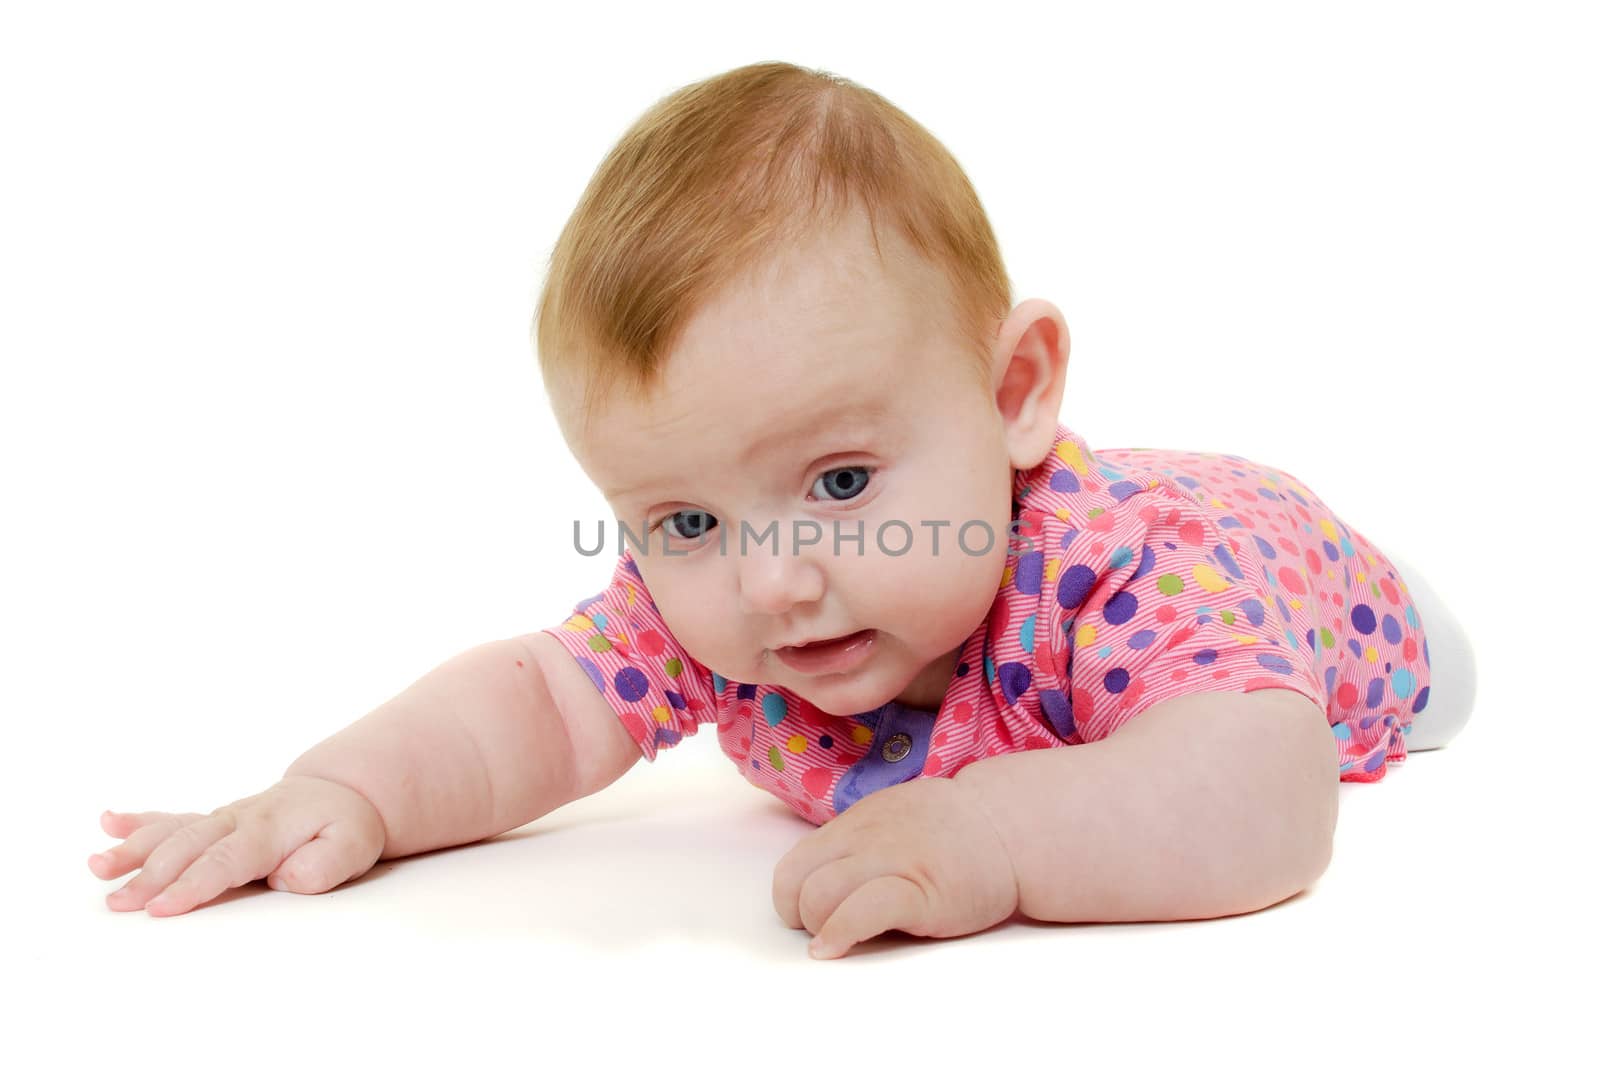 A sweet happy baby 3 month young. Resting on af white background.